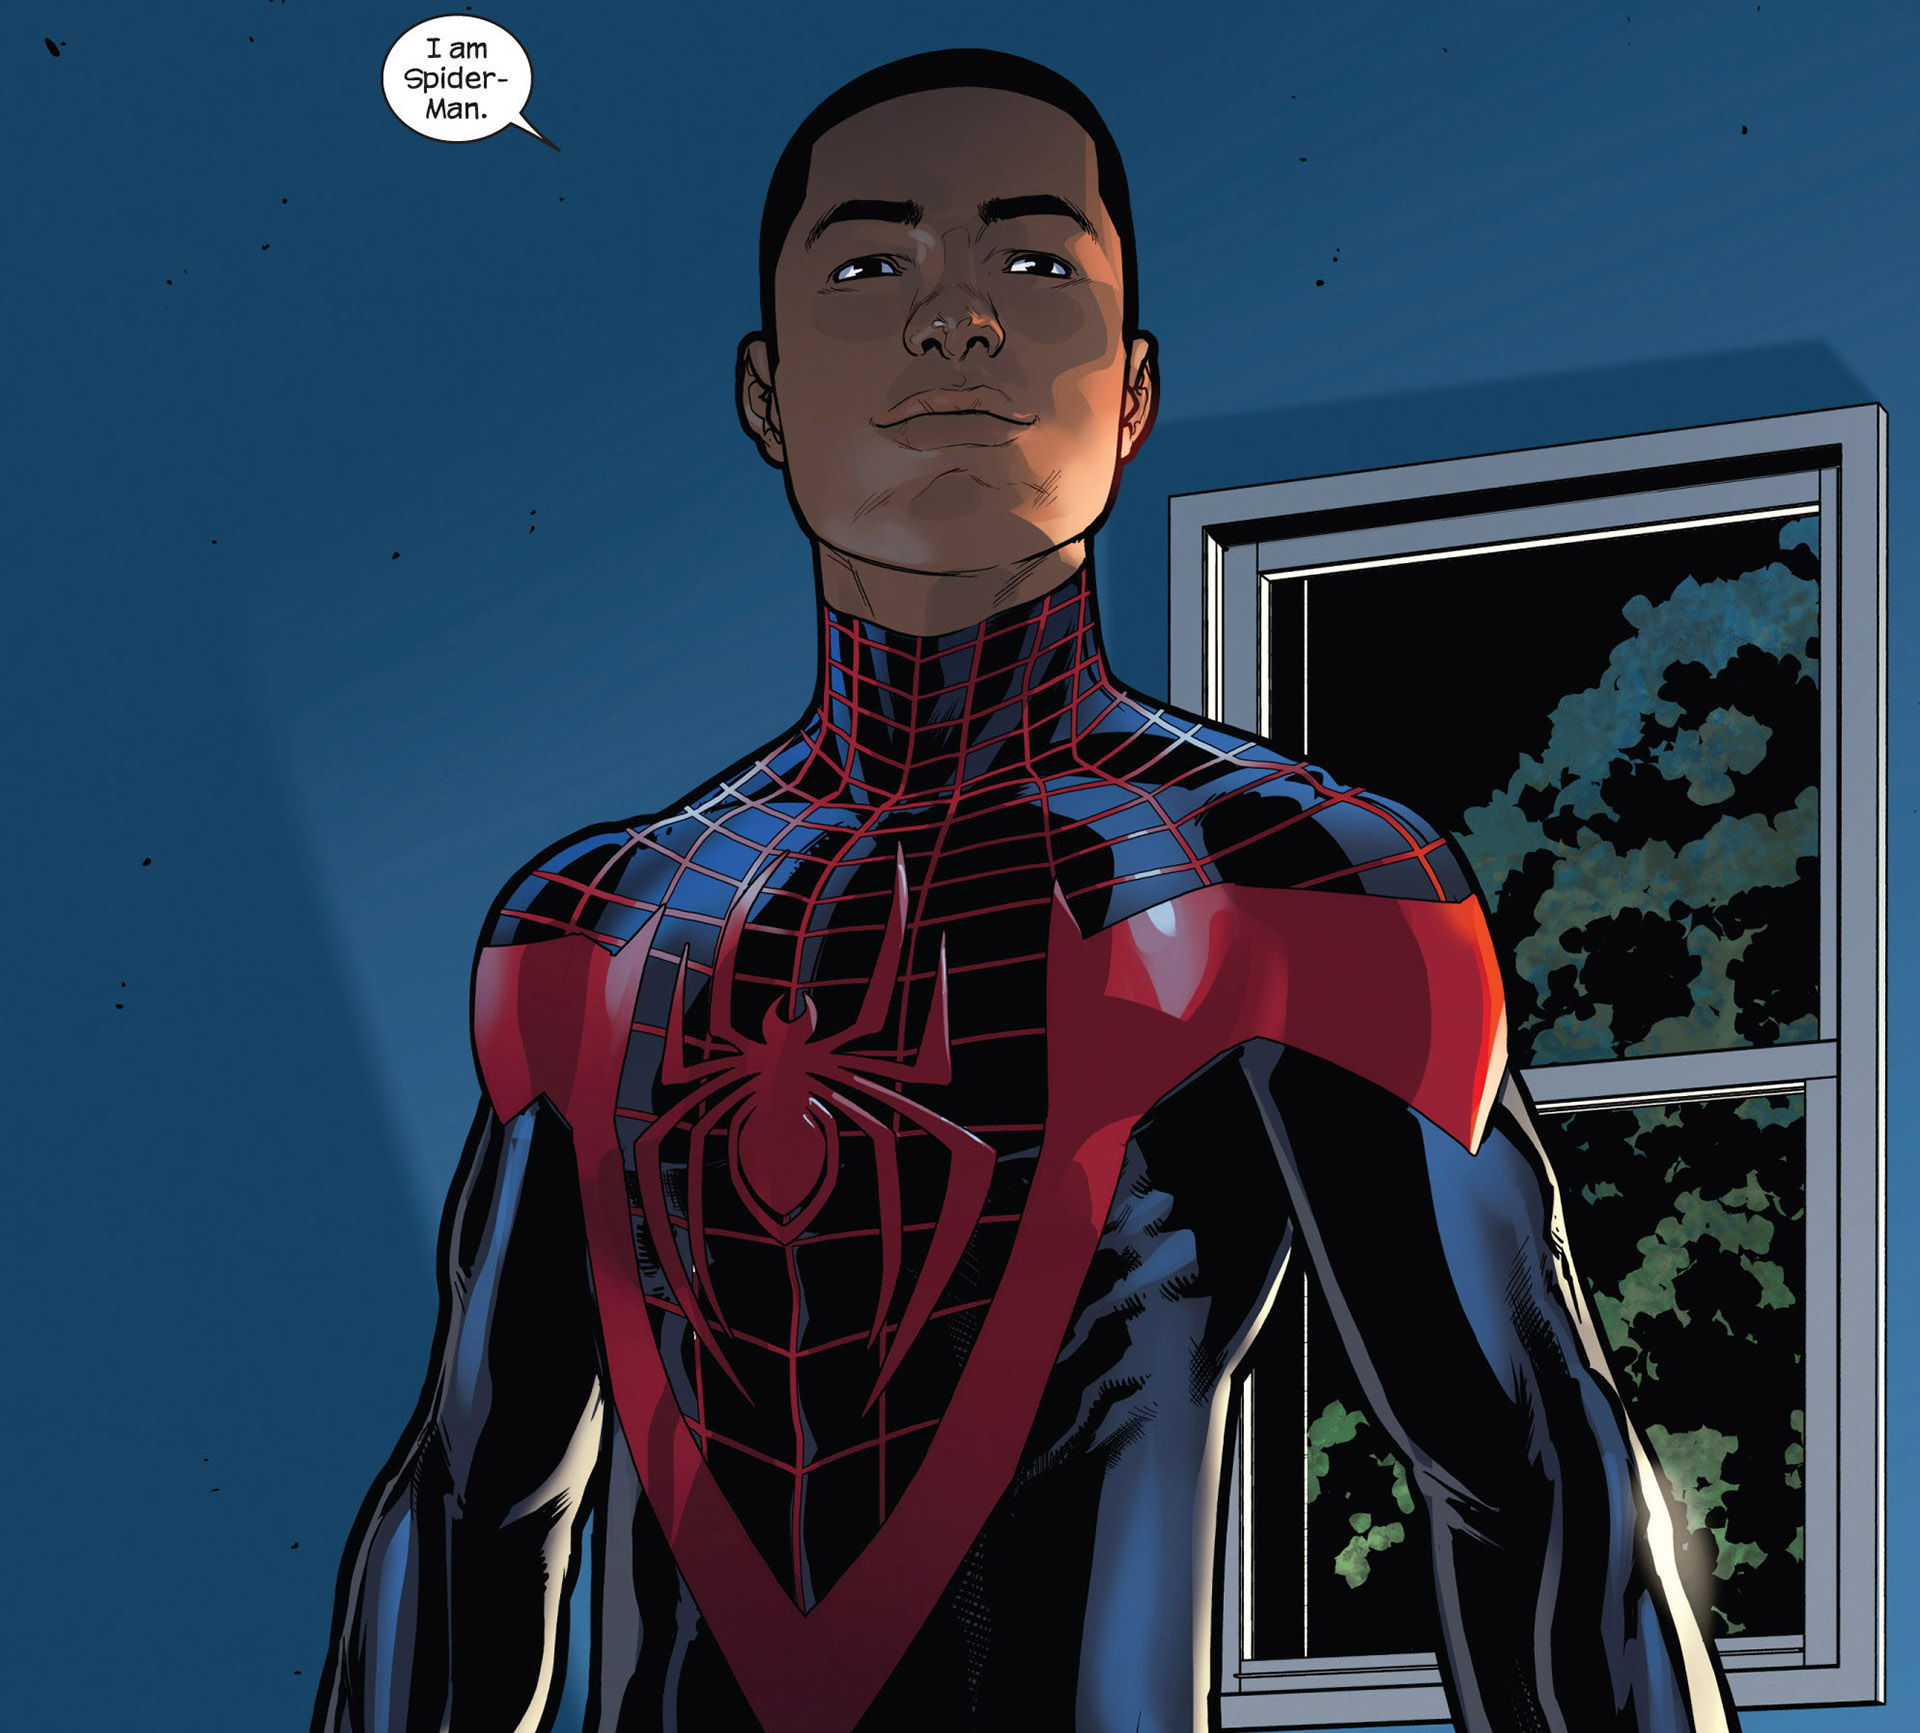 Spider-Man Might Not Be White In Next Film